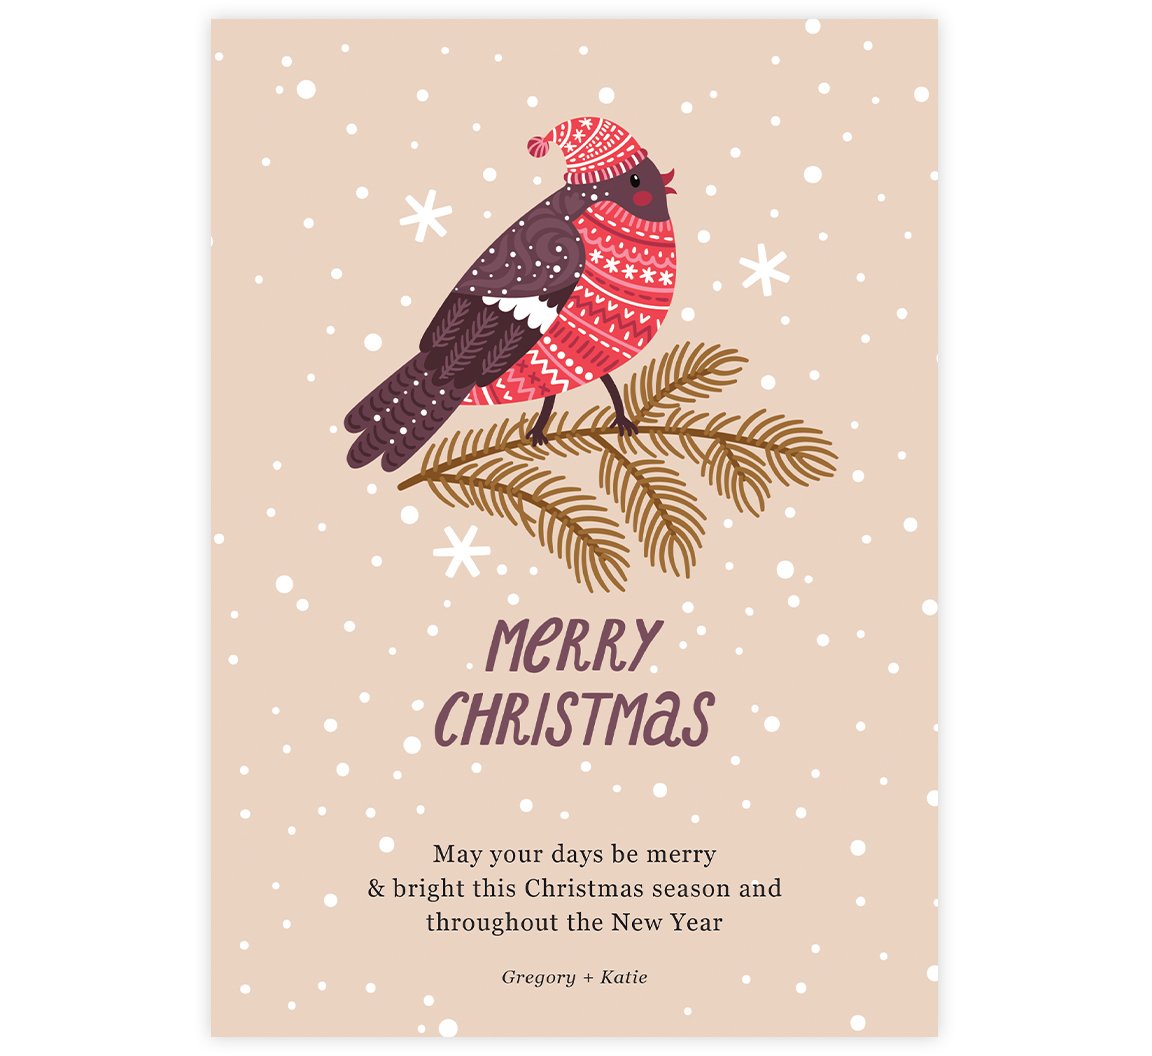 Christmas Bird Holiday Card; Light cream background with white snowflakes and bird illustration